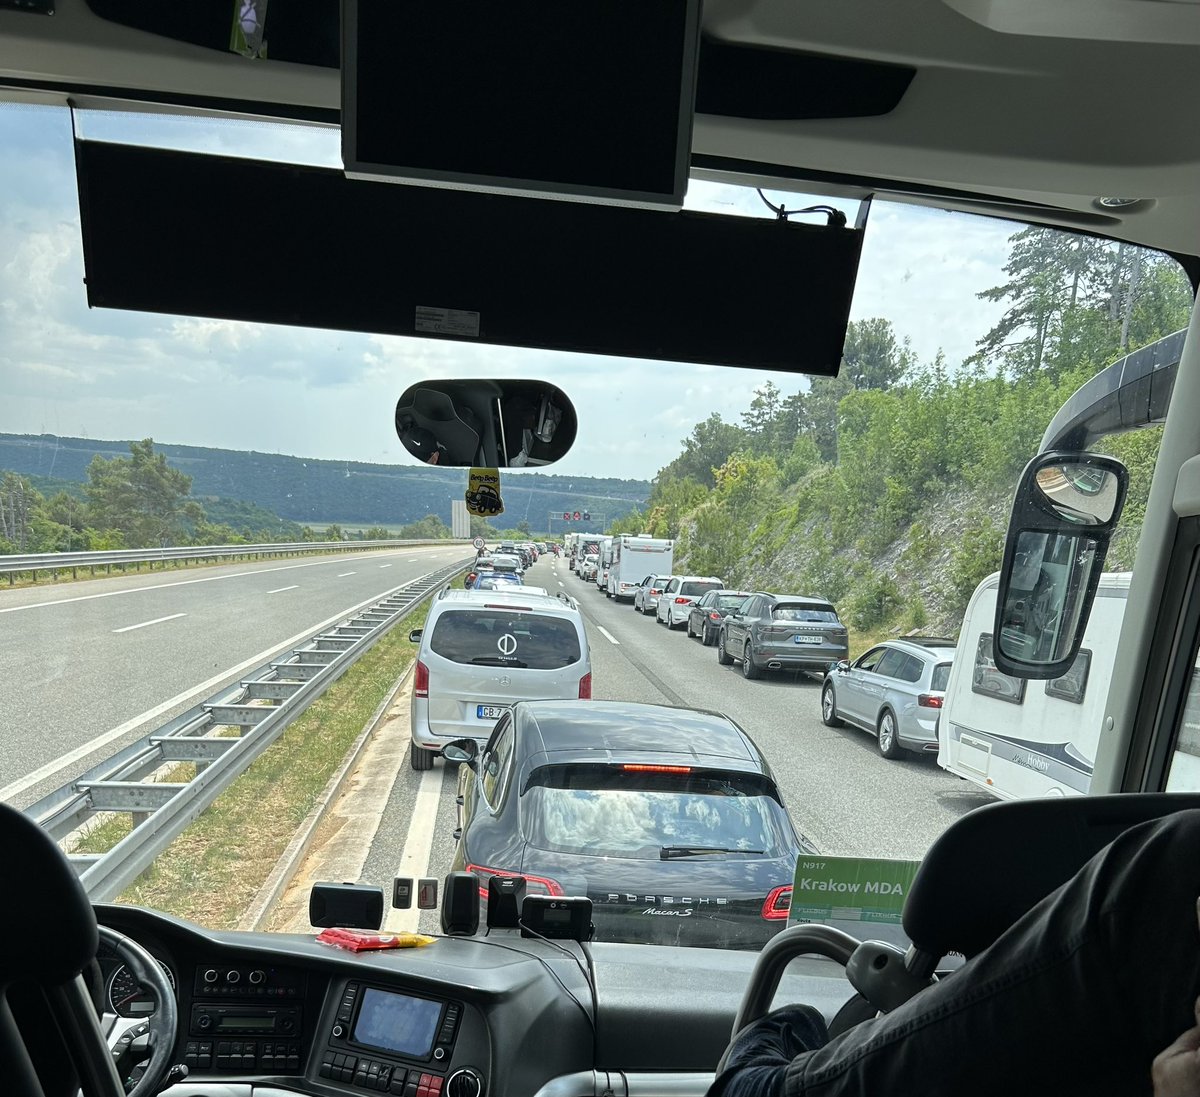 @AndrewVossy @CCMariners @aleaguemen @VossyBrandySEN @commbankstadium I hope you’re enjoying a night off from calling the league. Just checked the score while I’m on my bus from Slovenia to Croatia. Traffic at a standstill. Go the Mariners!